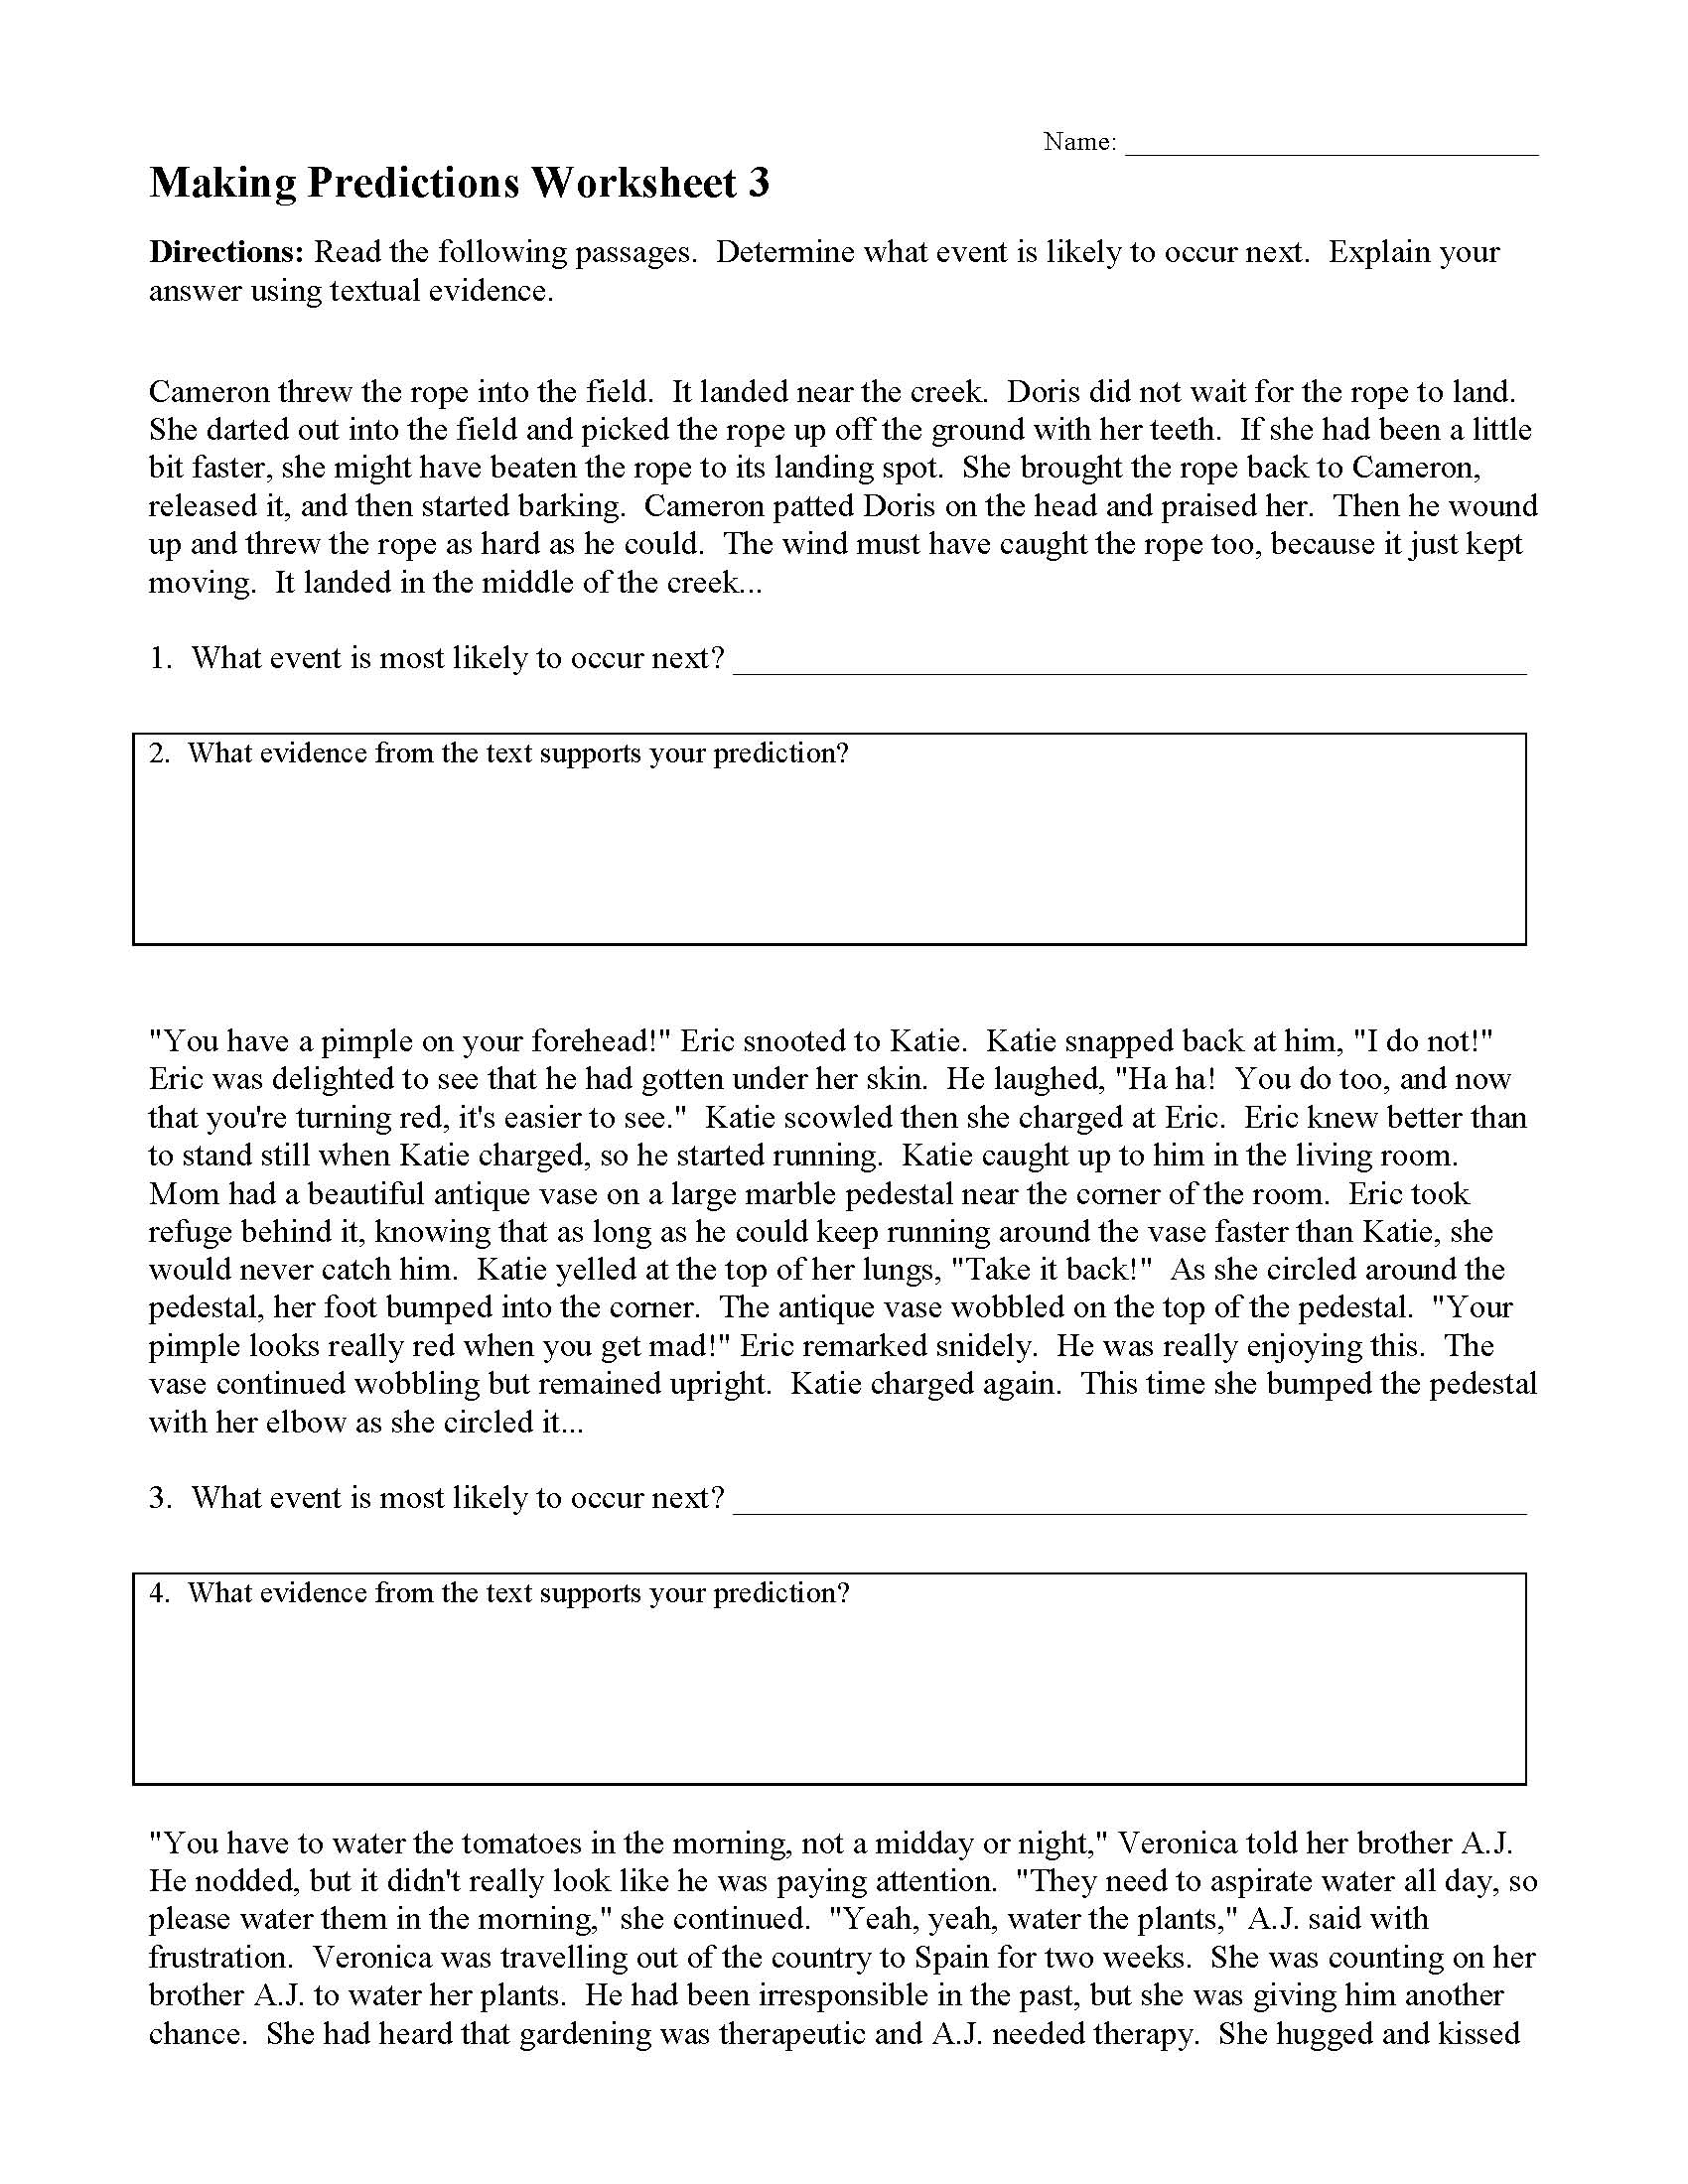 This is a preview image of Making Predictions Worksheet 3. Click on it to enlarge it or view the source file.